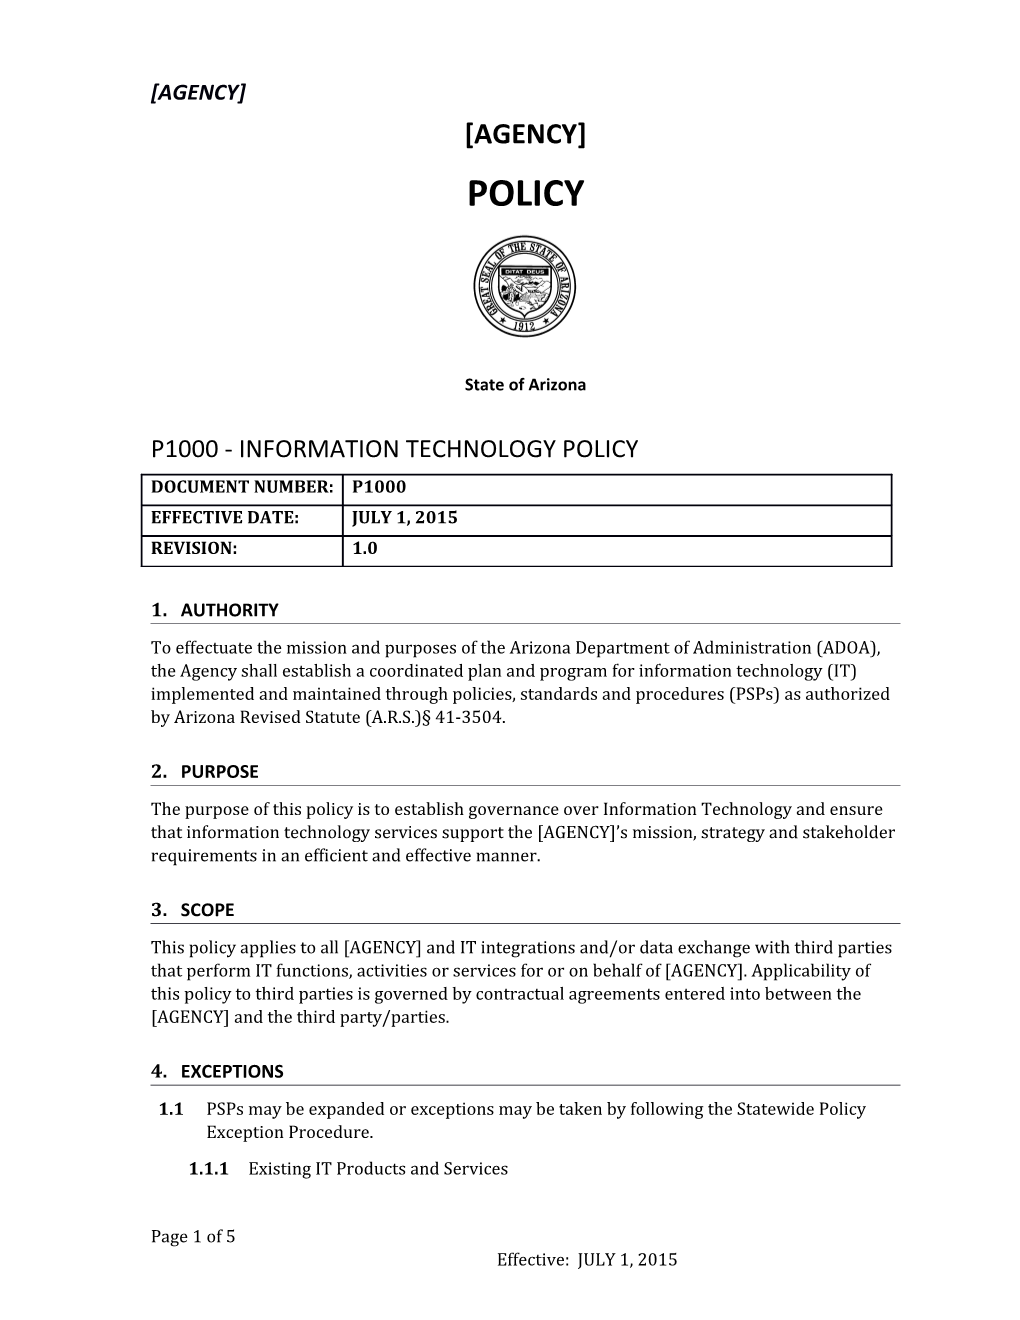 P1000 Information Technology Policy